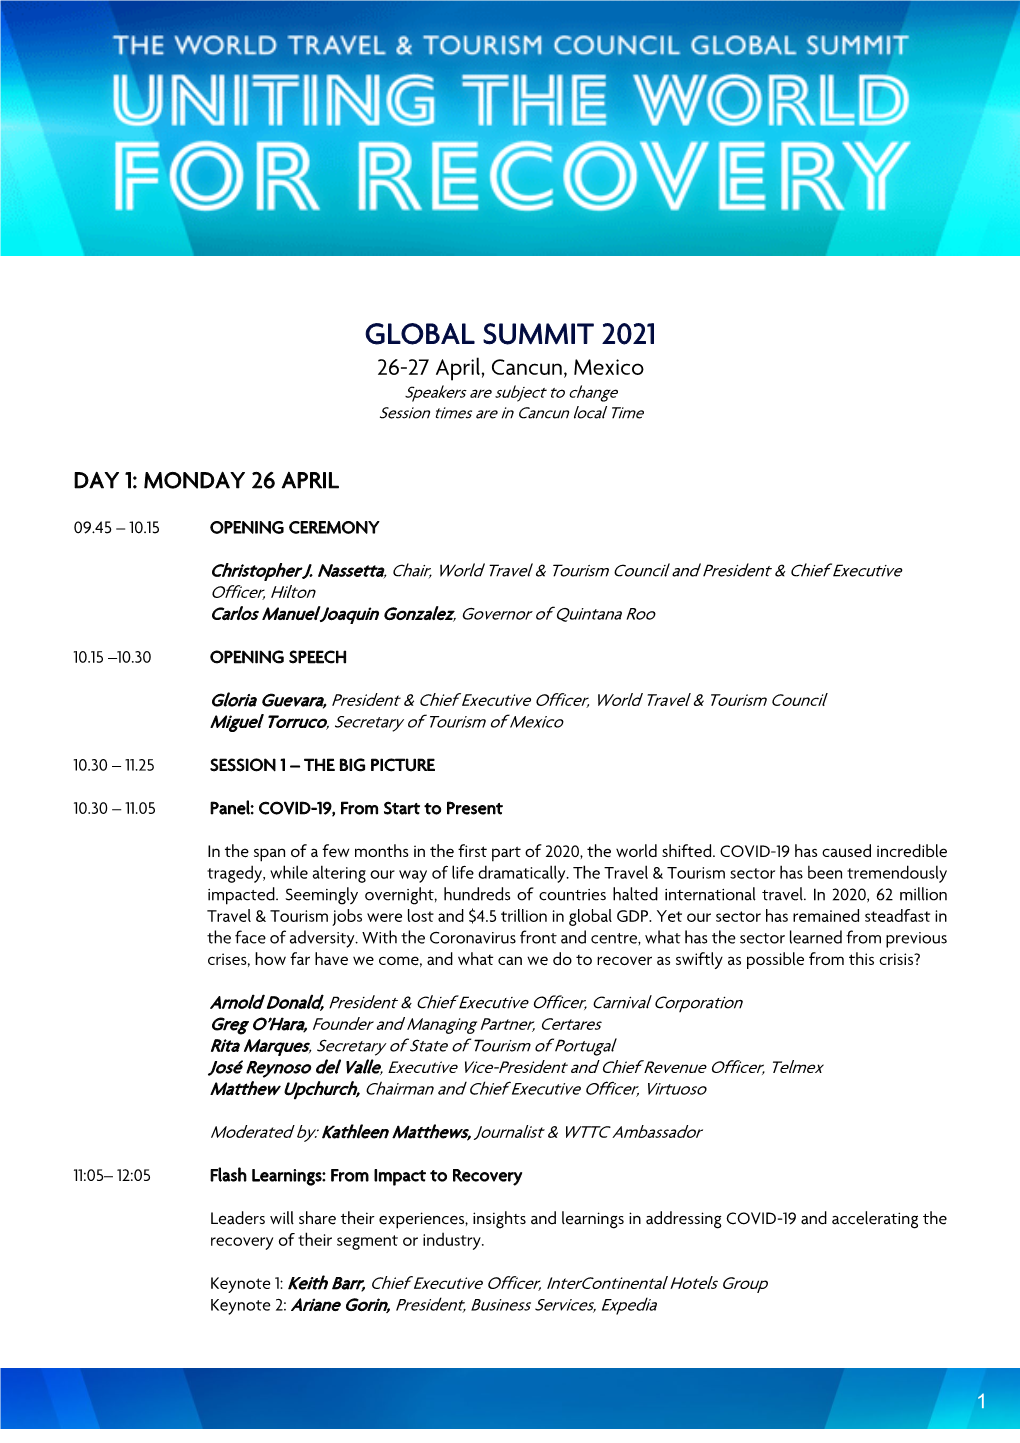 GLOBAL SUMMIT 2021 26-27 April, Cancun, Mexico Speakers Are Subject to Change Session Times Are in Cancun Local Time